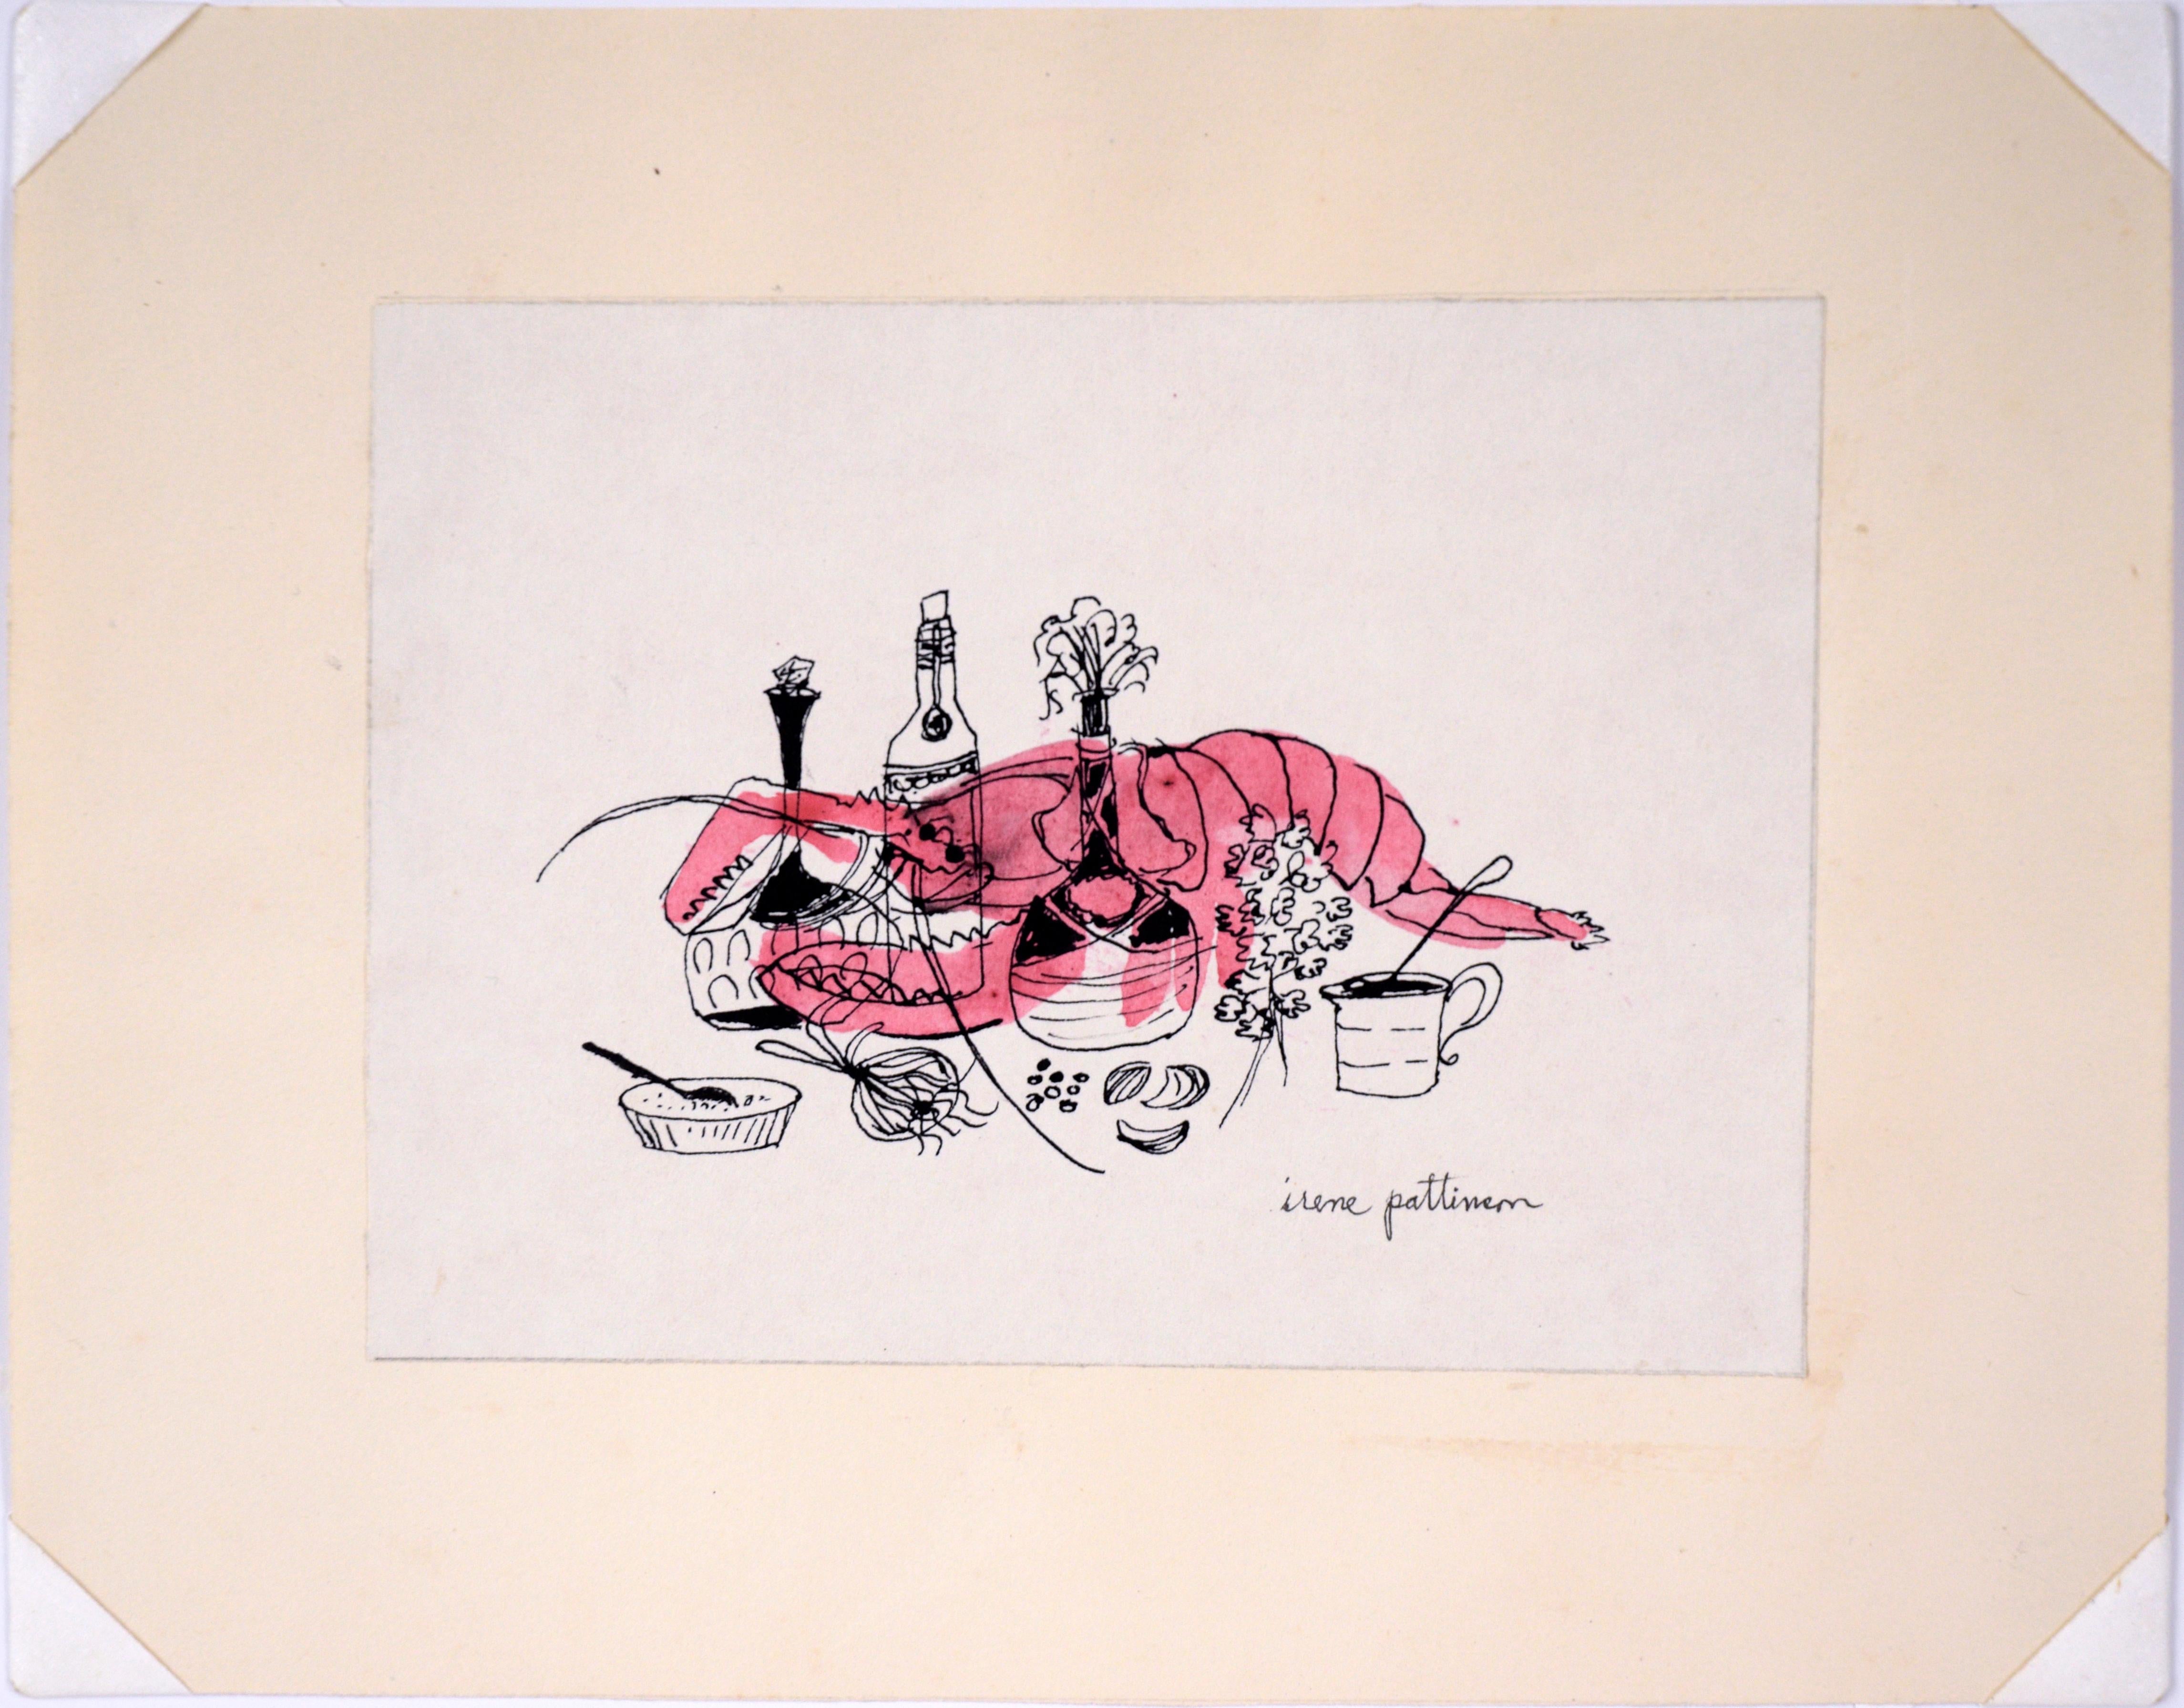 Chef Lobster - Vintage Illustration in Ink and Watercolor

A charming illustration, by Irene Pattinson (American, 1909-1999), shows a pink lobster behind ornate bottles of oil and other cooking ingredients, including garlic and onion, in fine line